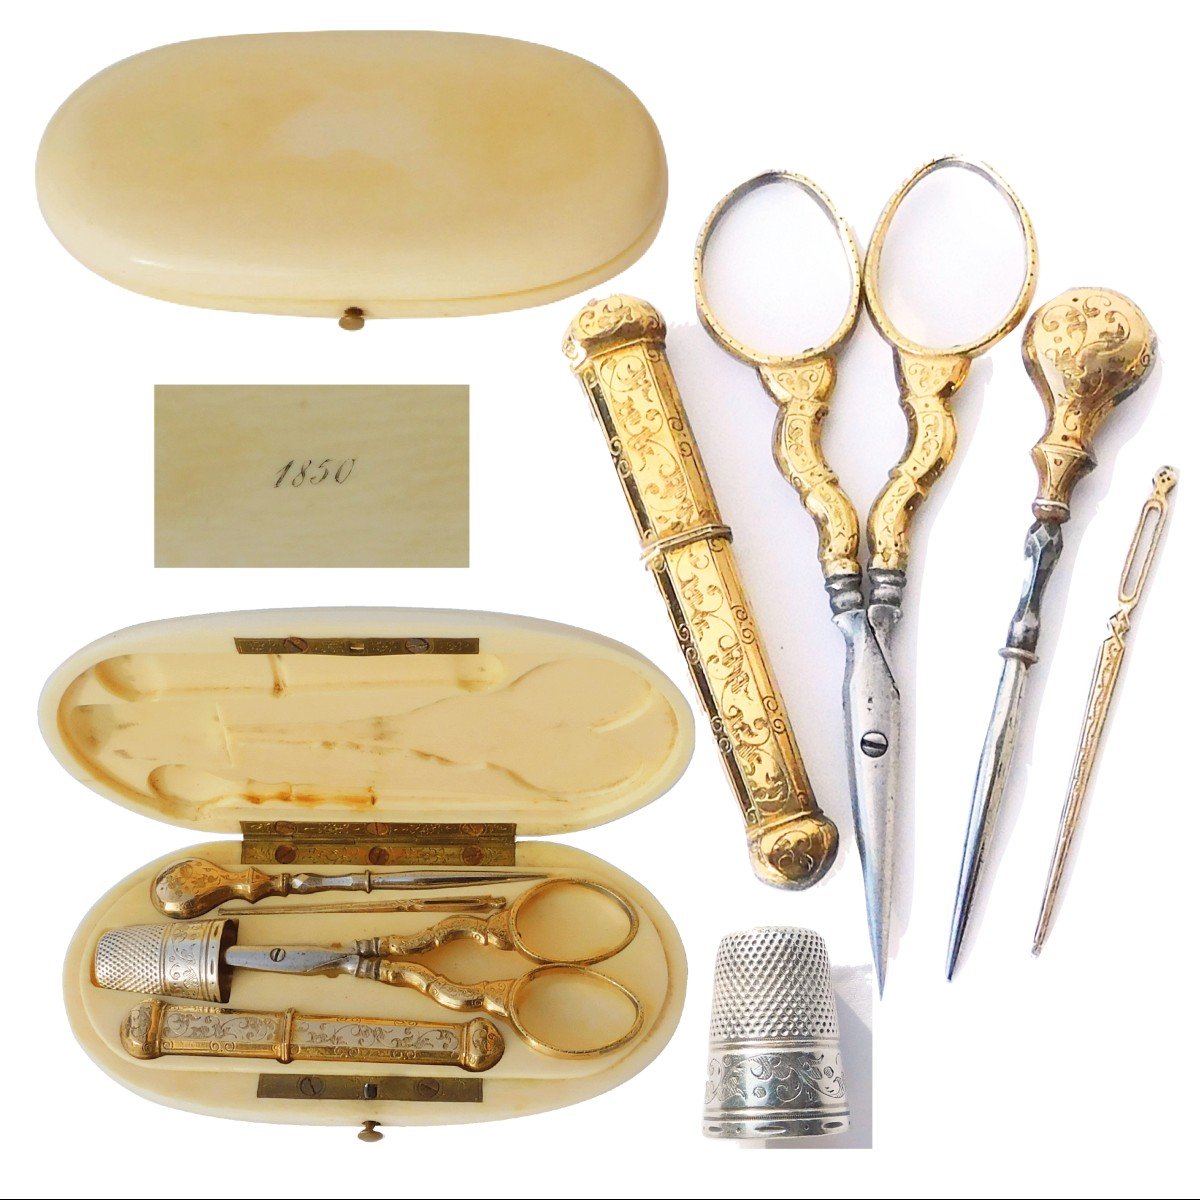 Napoleon III Gold Plated Silver Vermeil Sewing Kit Ivory Box 1850